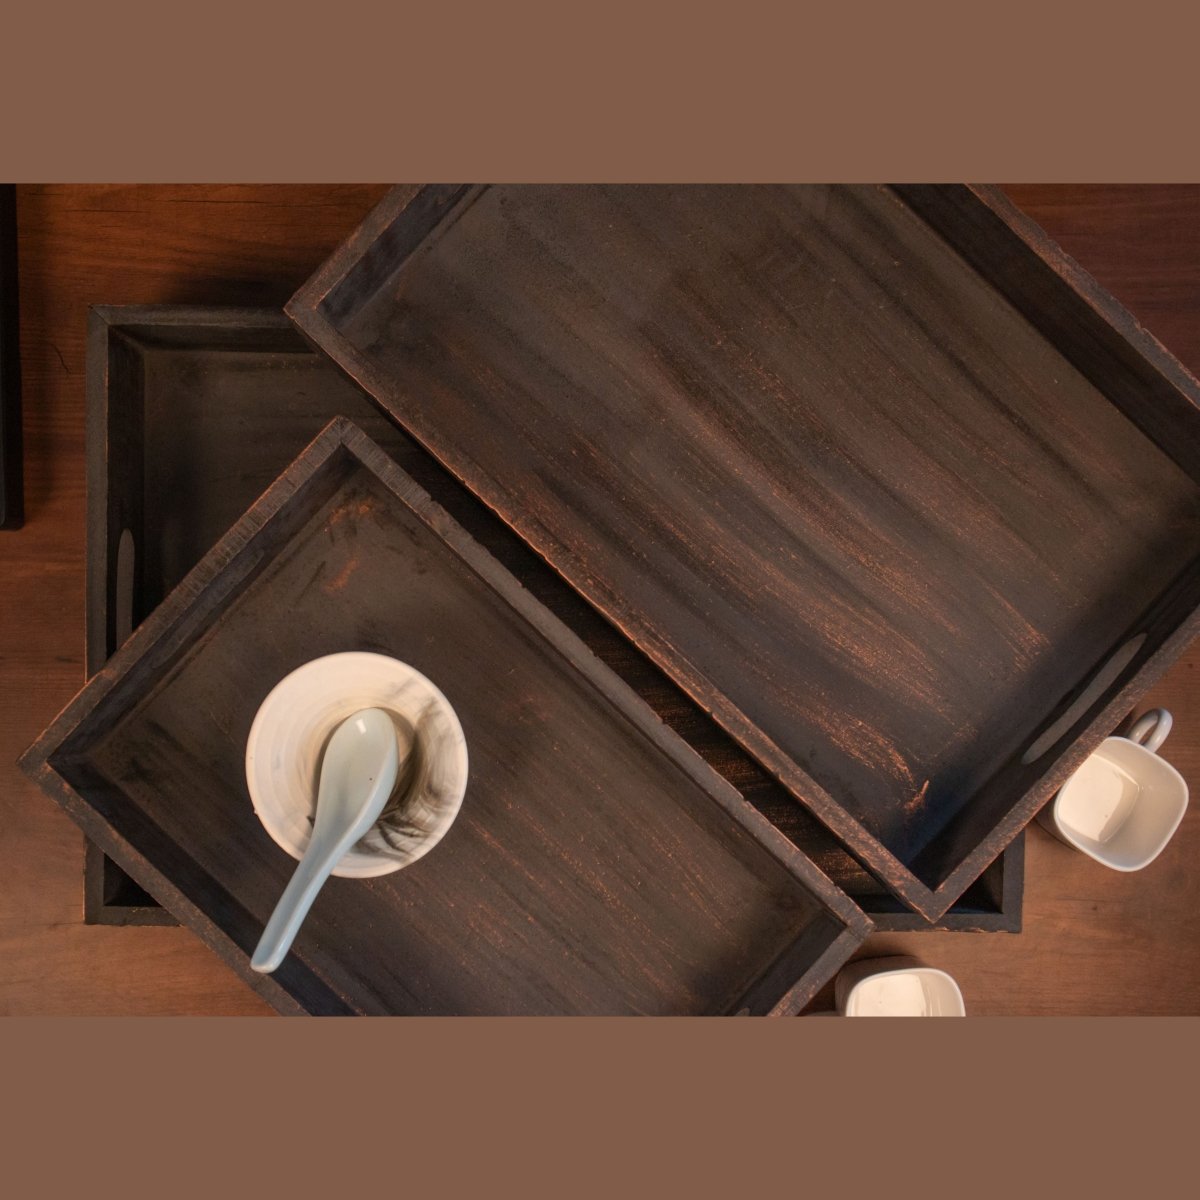 Kezevel Wooden Serving Tray - Brown and Copper Rectangle Handcrafted Tray for Home Decor, Dinning Table Tray, Tea Coffee Tray